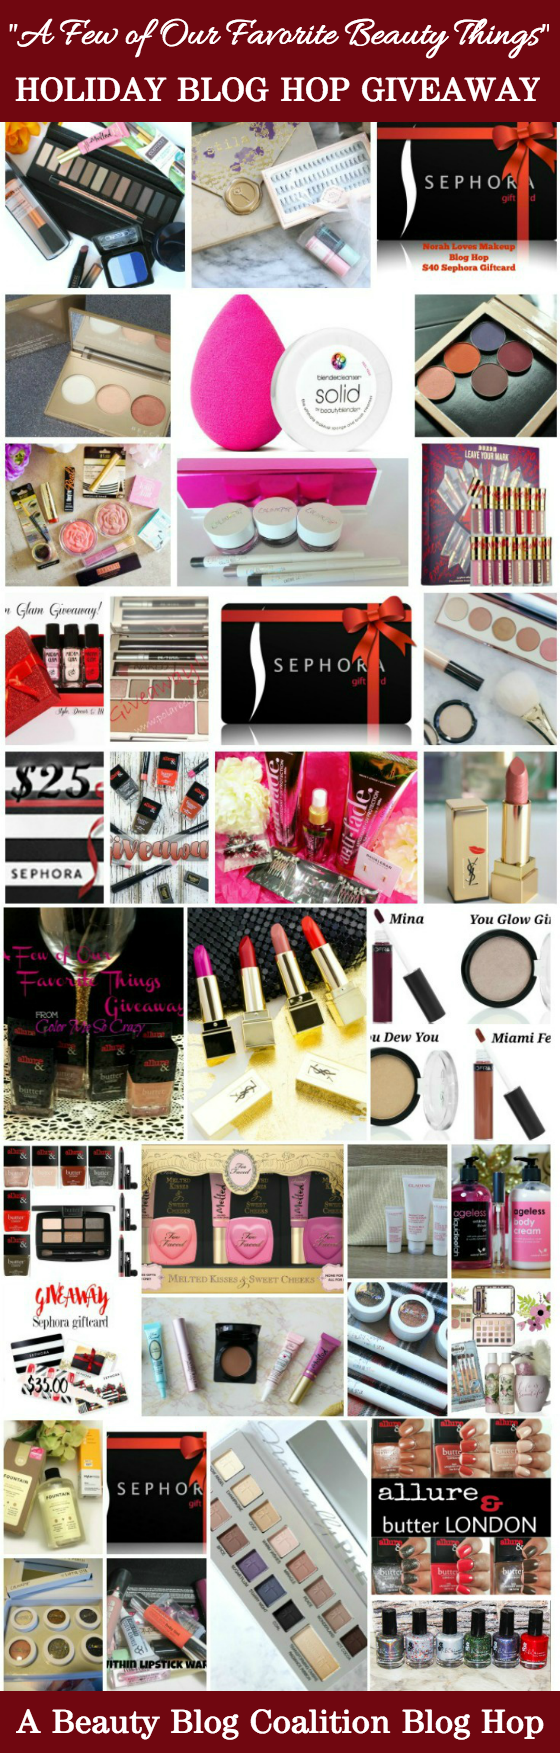 BBC Beauty Blog Hop Holiday Giveaway - 35 Prizes